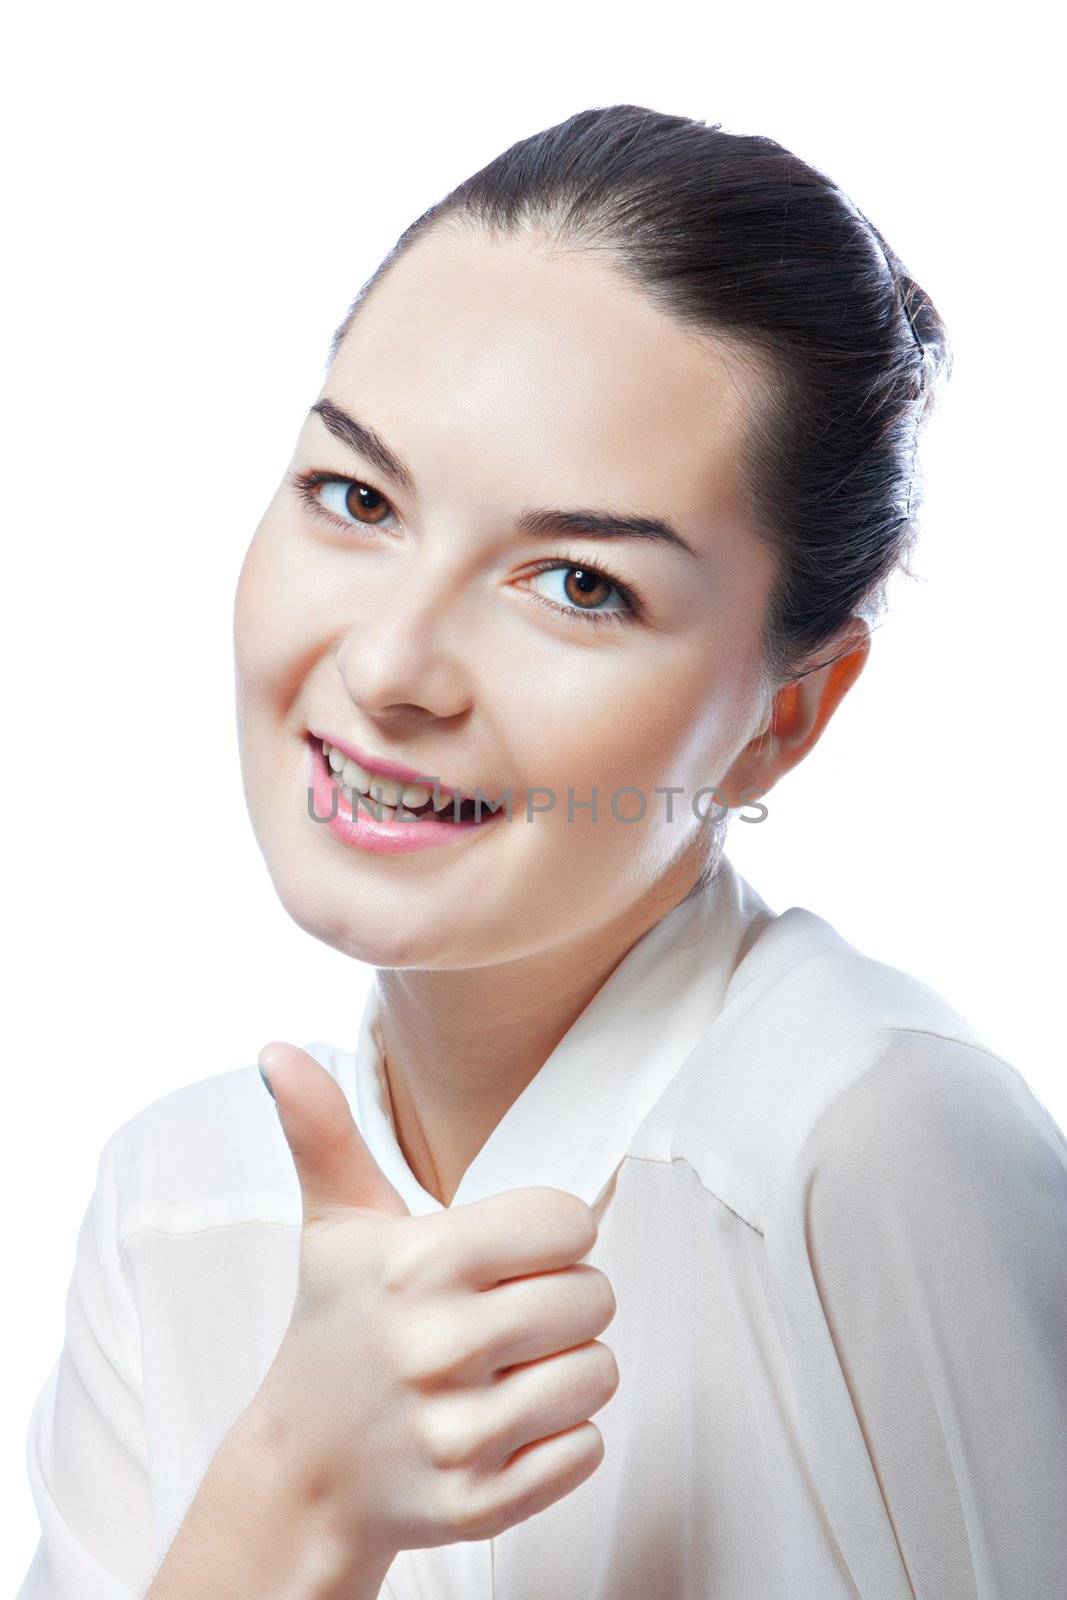 happy woman shows her finger up isolated on white background.